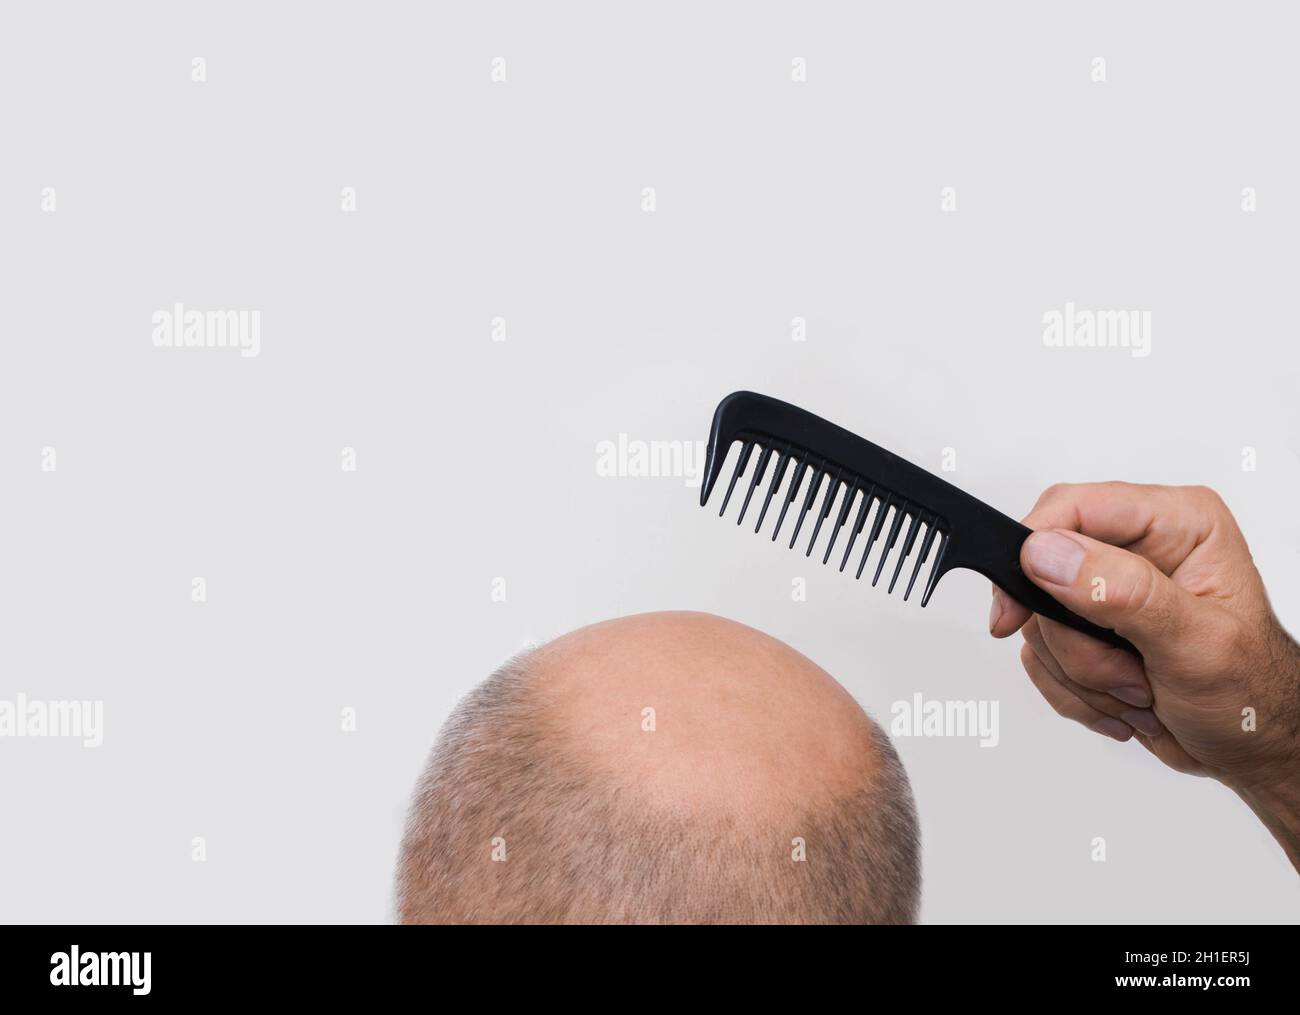 Human alopecia or hair loss - adult man hand holding comb on bald head Stock Photo